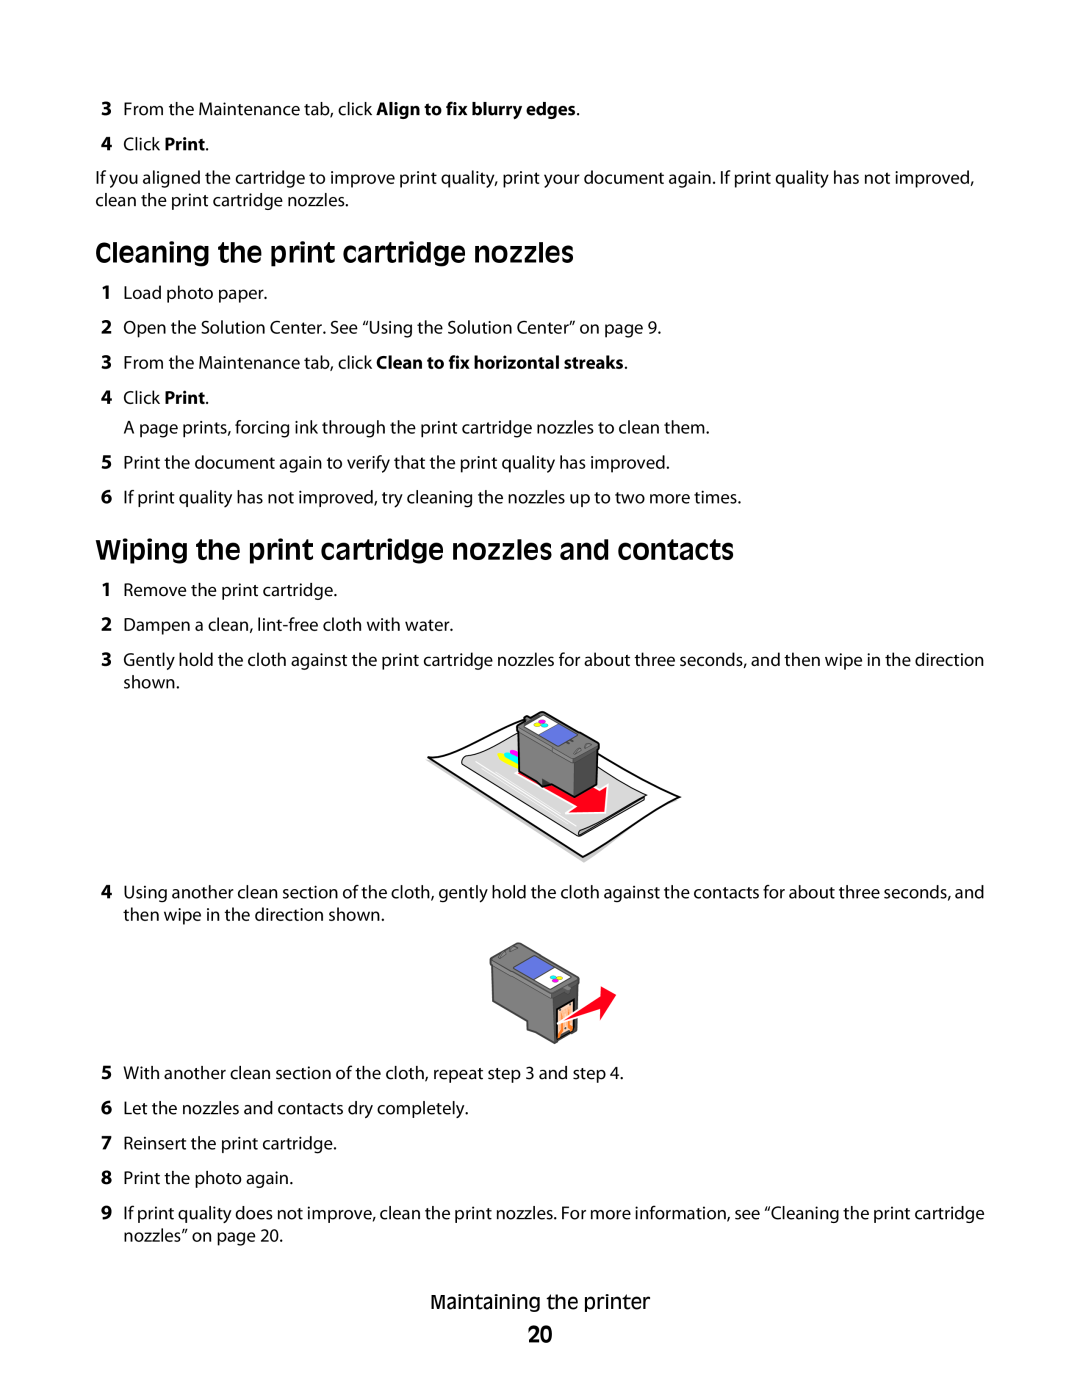 Lexmark P200 Series manual Cleaning the print cartridge nozzles, Wiping the print cartridge nozzles and contacts 